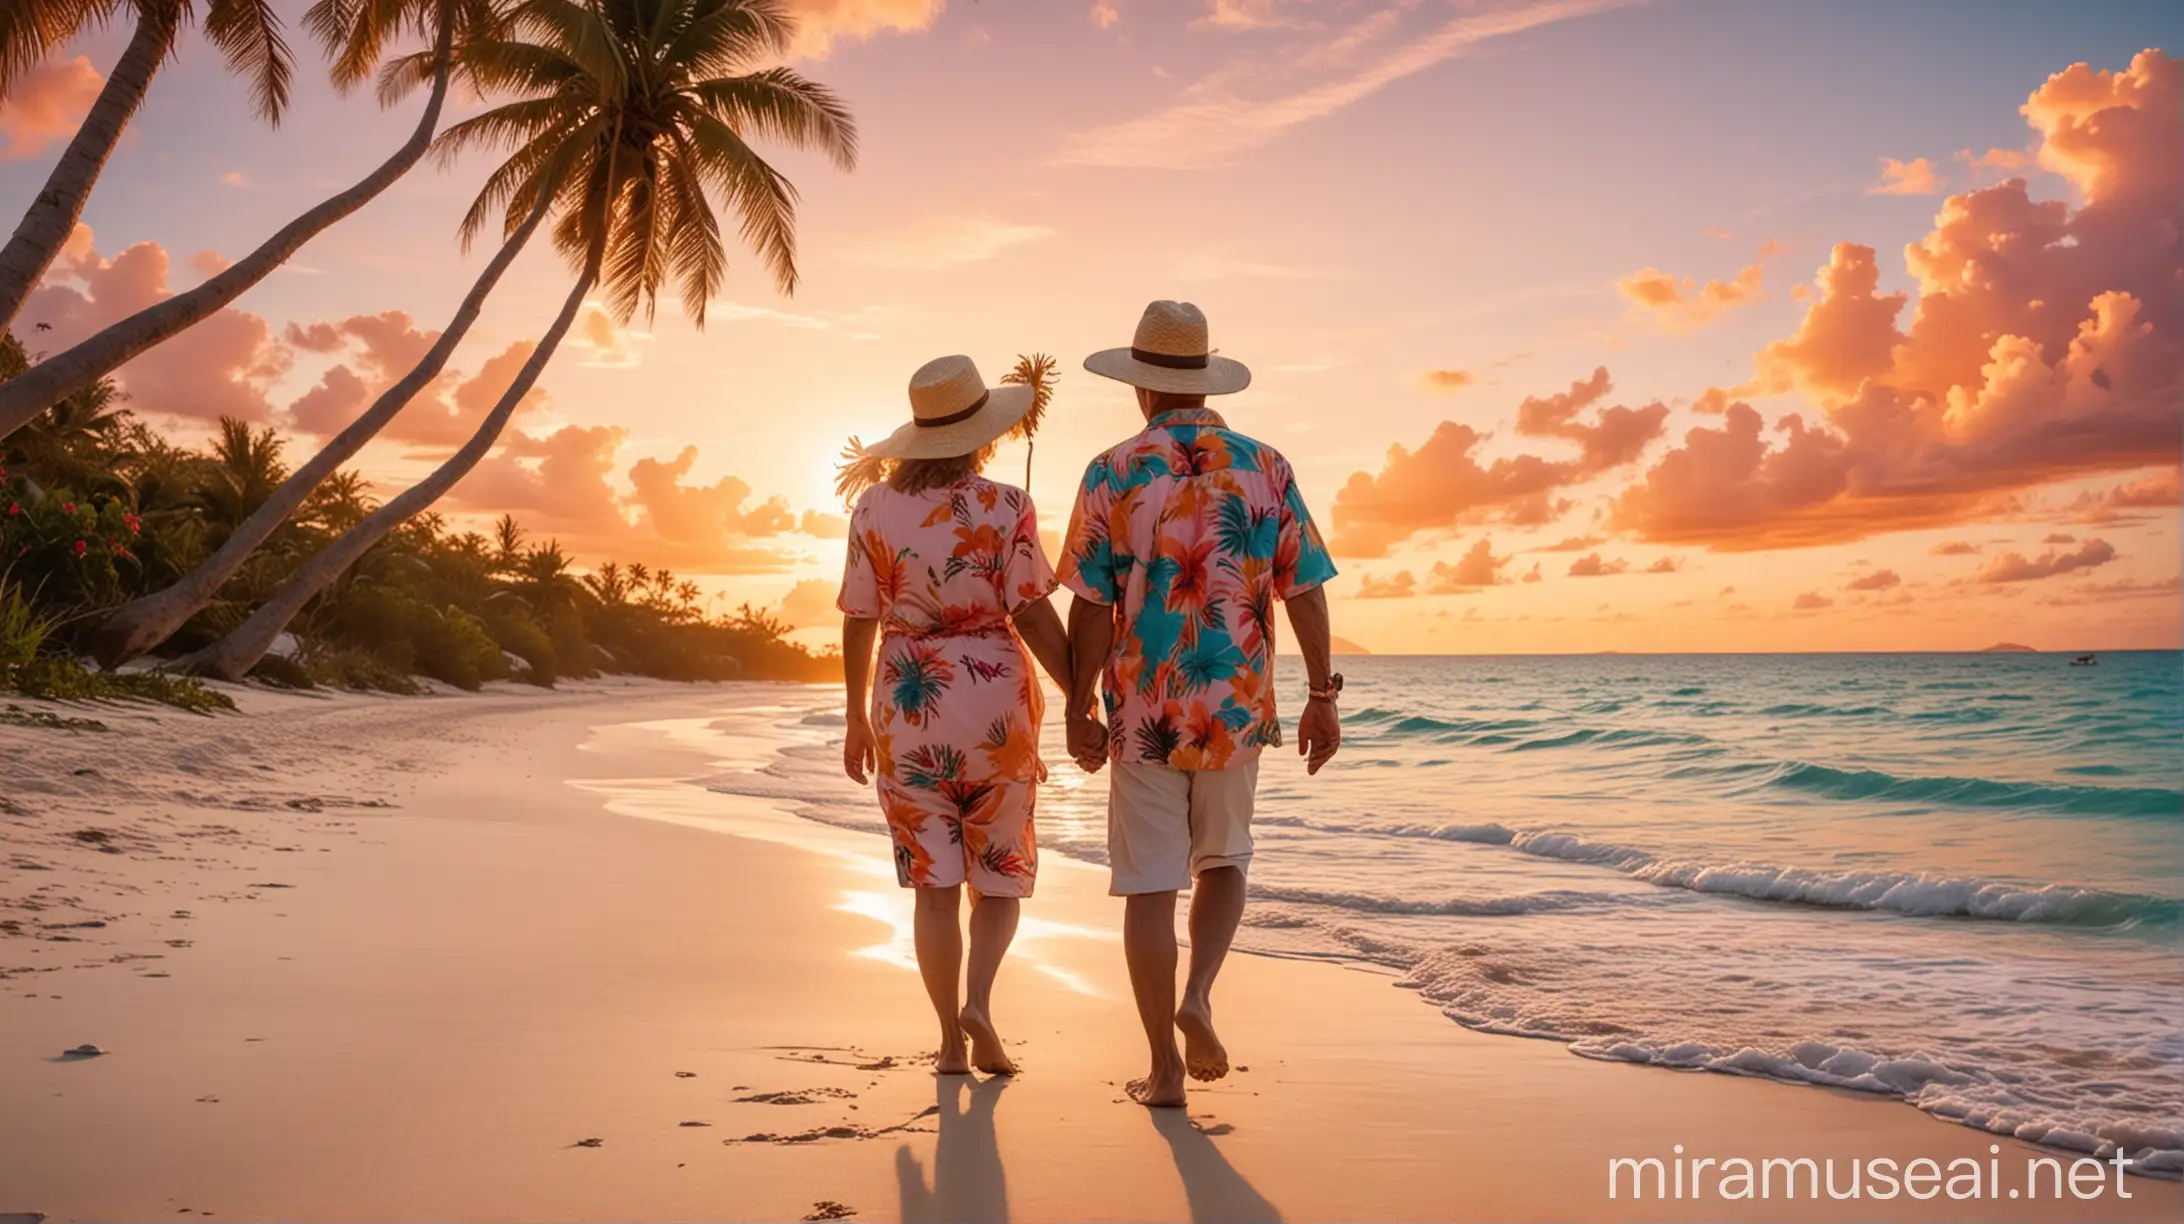 Two people of retirement age walk hand in hand on a Caribbean beach with white sand and turquoise water.The sun is setting on the horizon, coloring the sky with shades of orange and pink. Palm trees sway gently in the breeze. They are dressed in floral shirts and straw hats, each holding a tropical cocktail. The sun is setting, creating a vibrant sky. Realistic